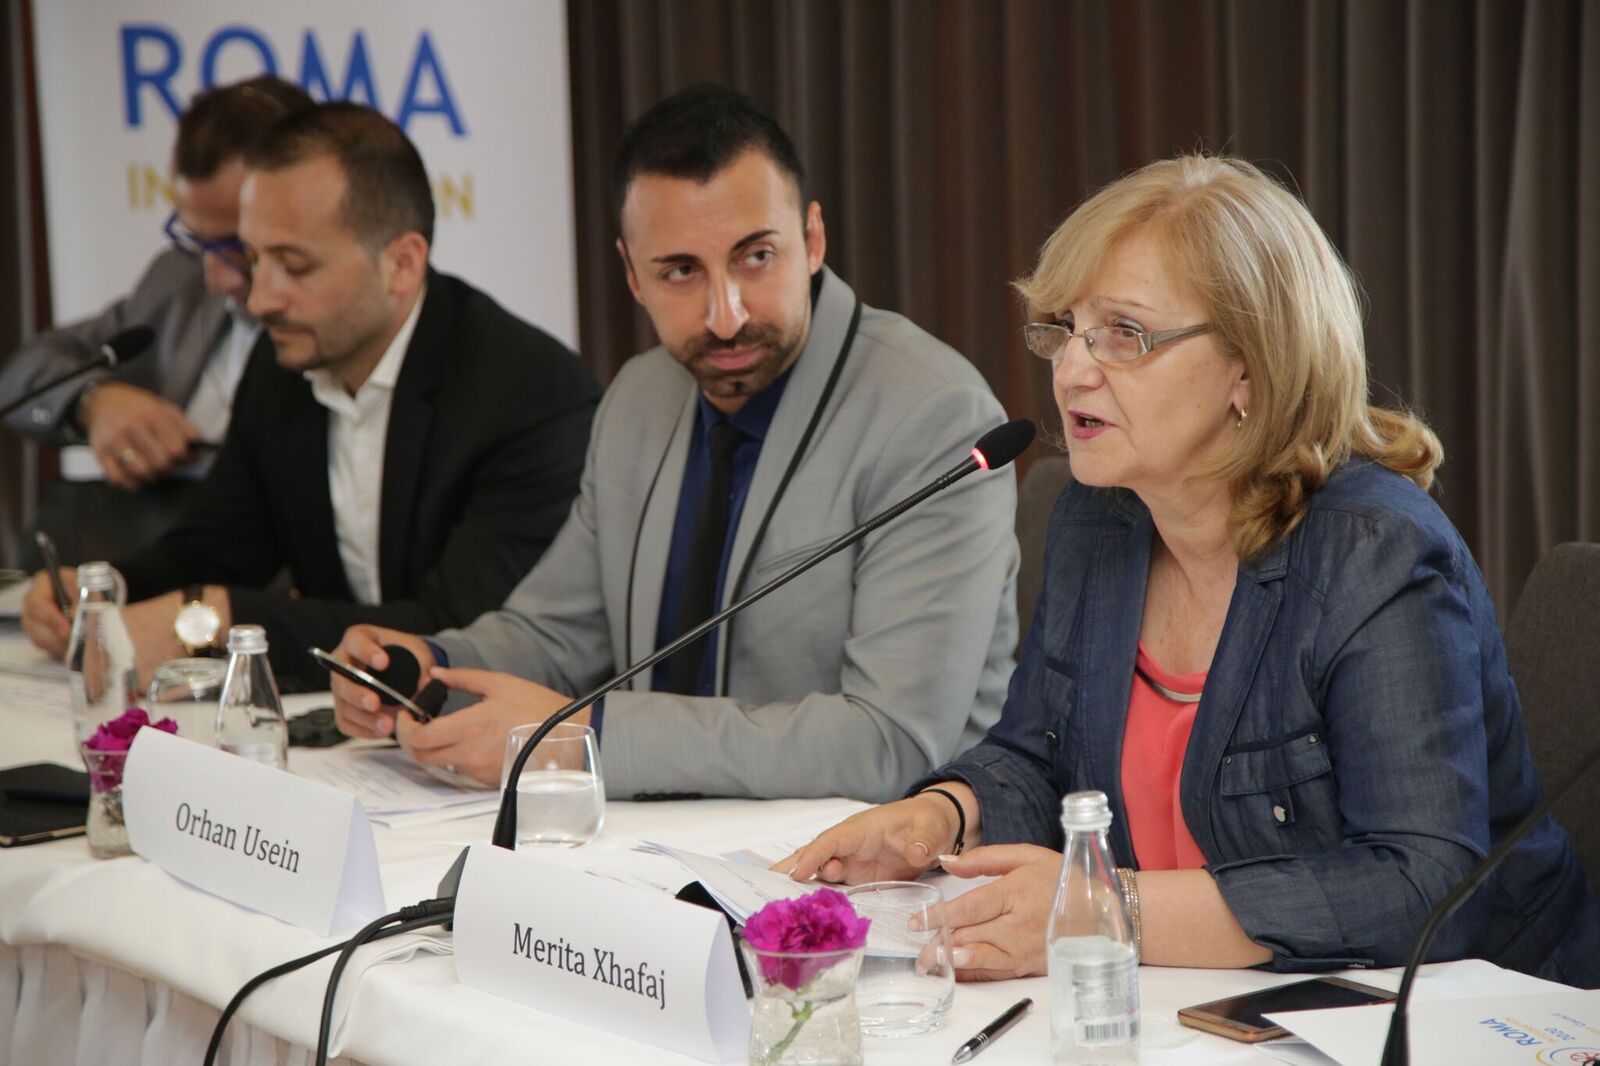 RCC' Roma Integration 2020 (RI2020) Action Team Leader, Orhan Usein (left) and Merita Xhafaj, General Director for Social Policies at the Ministry of Social Welfare and Youth and National Roma Contact Point (right) at the opening of the Public Dialogue Forum in Tirana on 23 May 2017. (Photo: Artemis Hajdini)